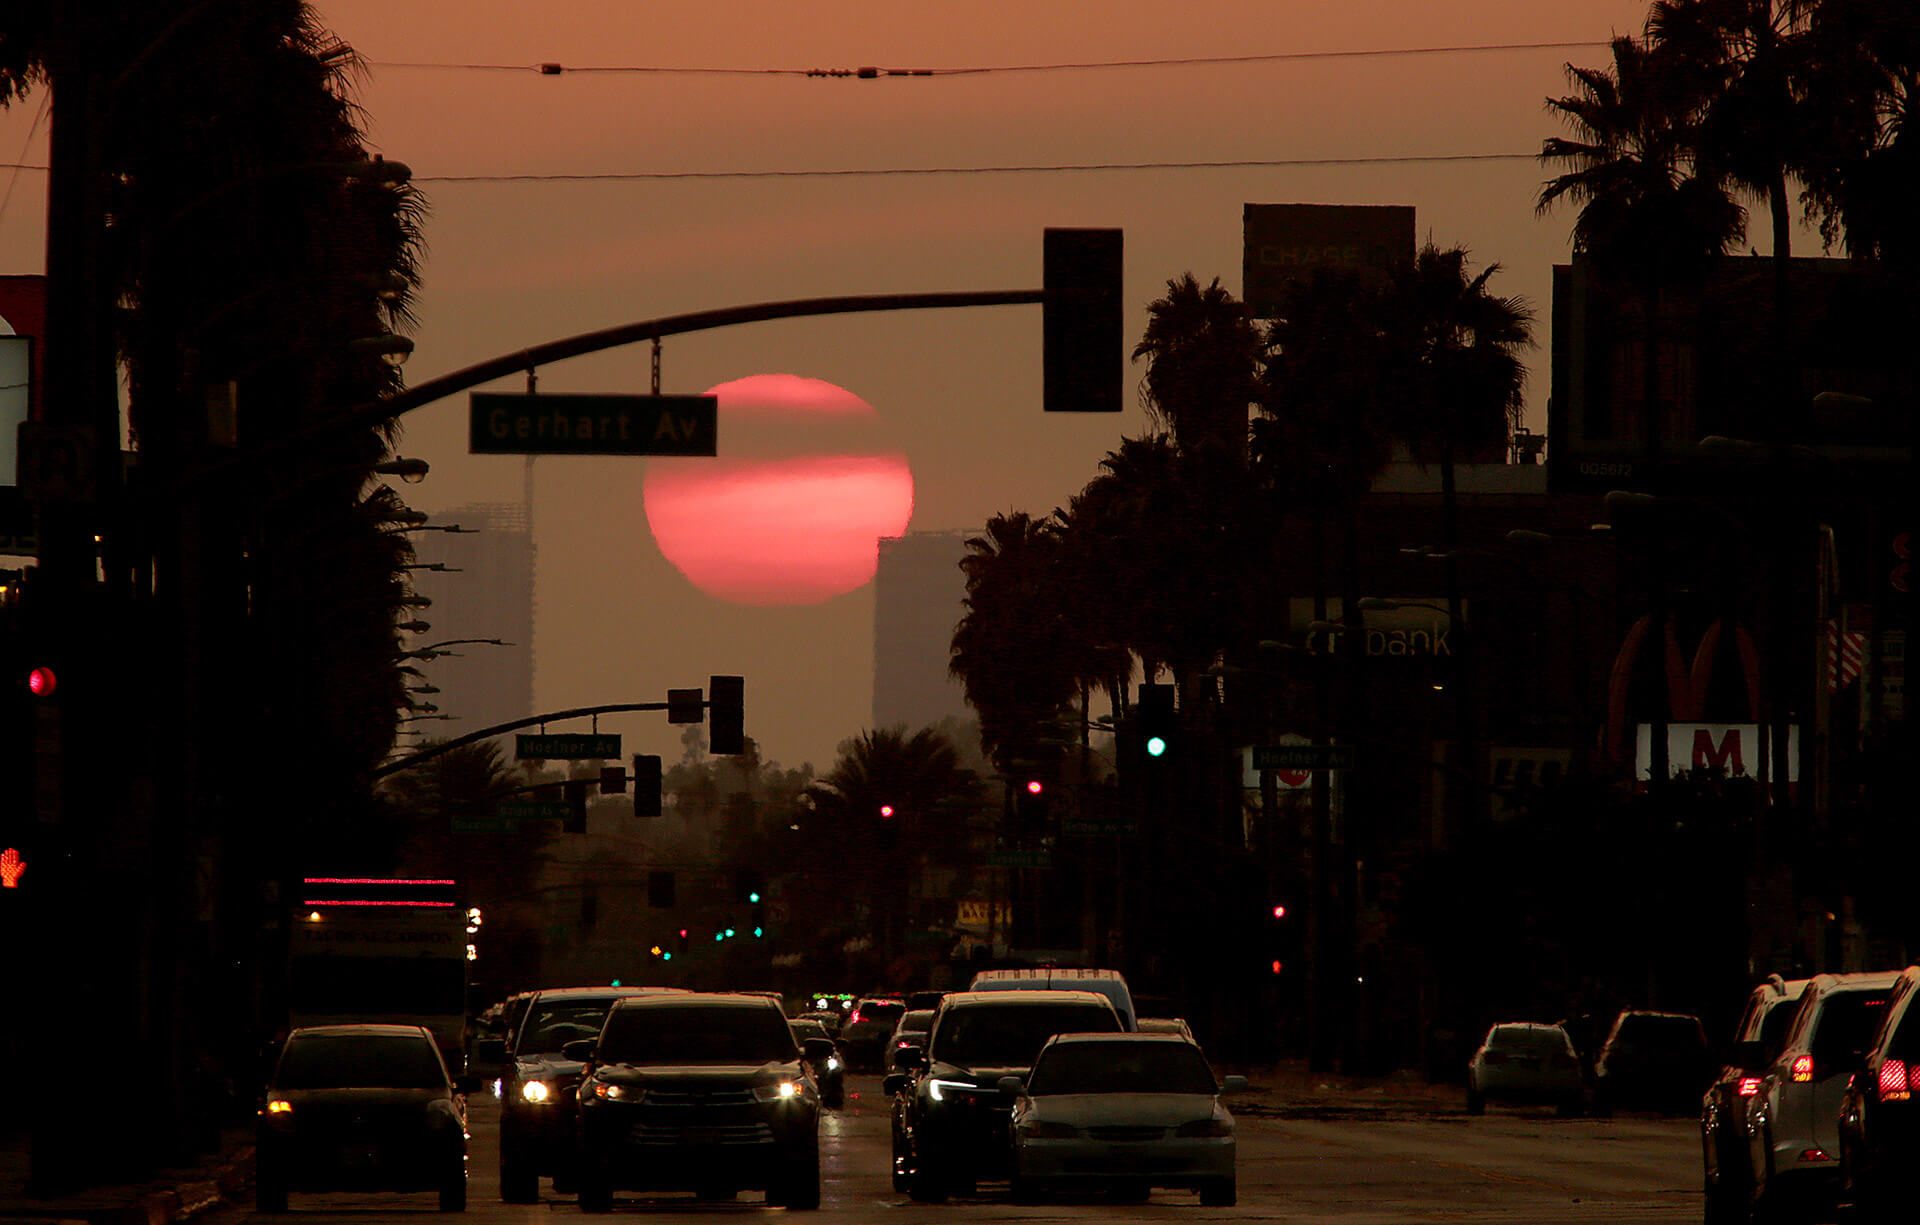 A present-day photo of Whittier Boulevard as the sun sets